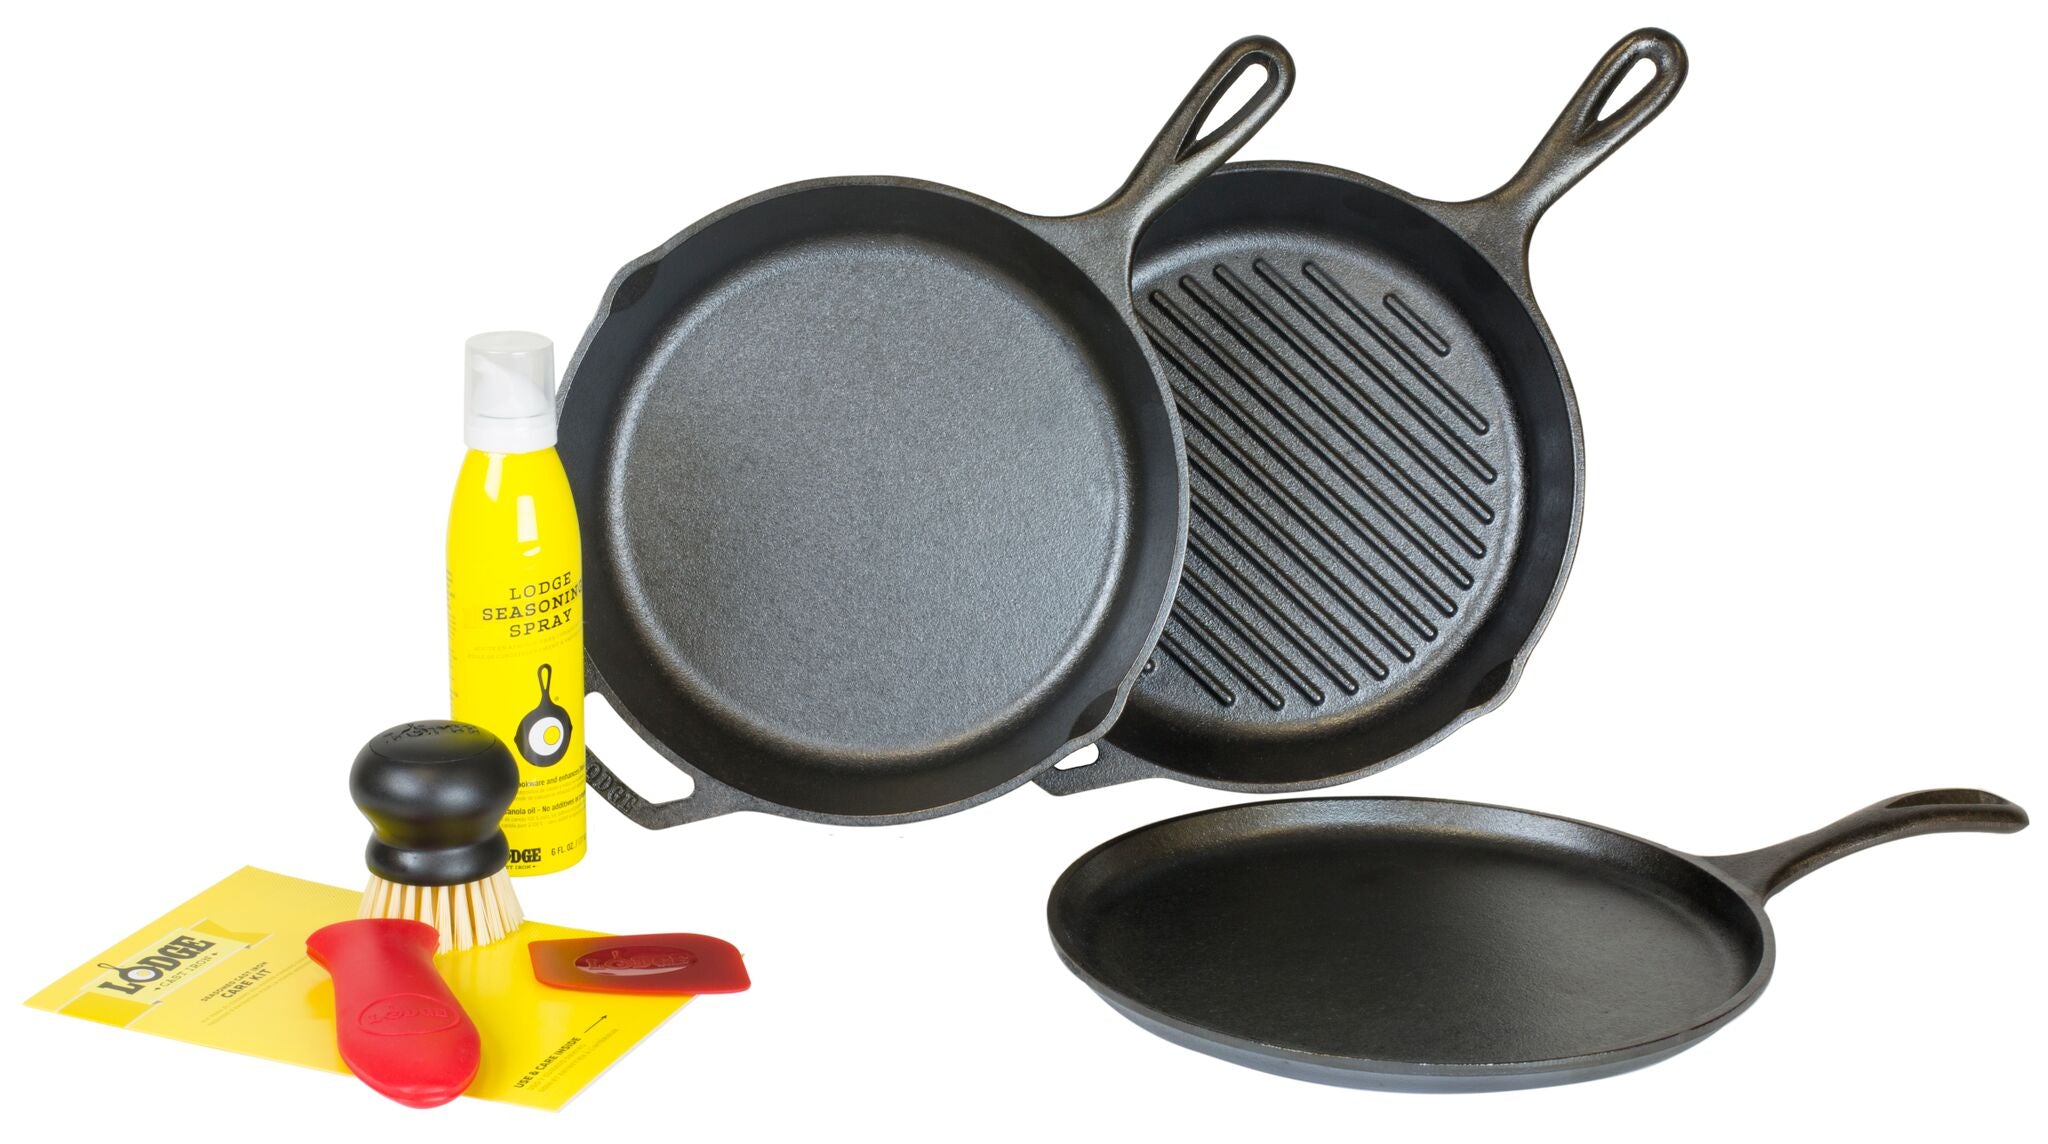 Lodge Cast Iron 7 Piece Gourmet Set (Free Shipping) – Rodriguez Butcher  Supply